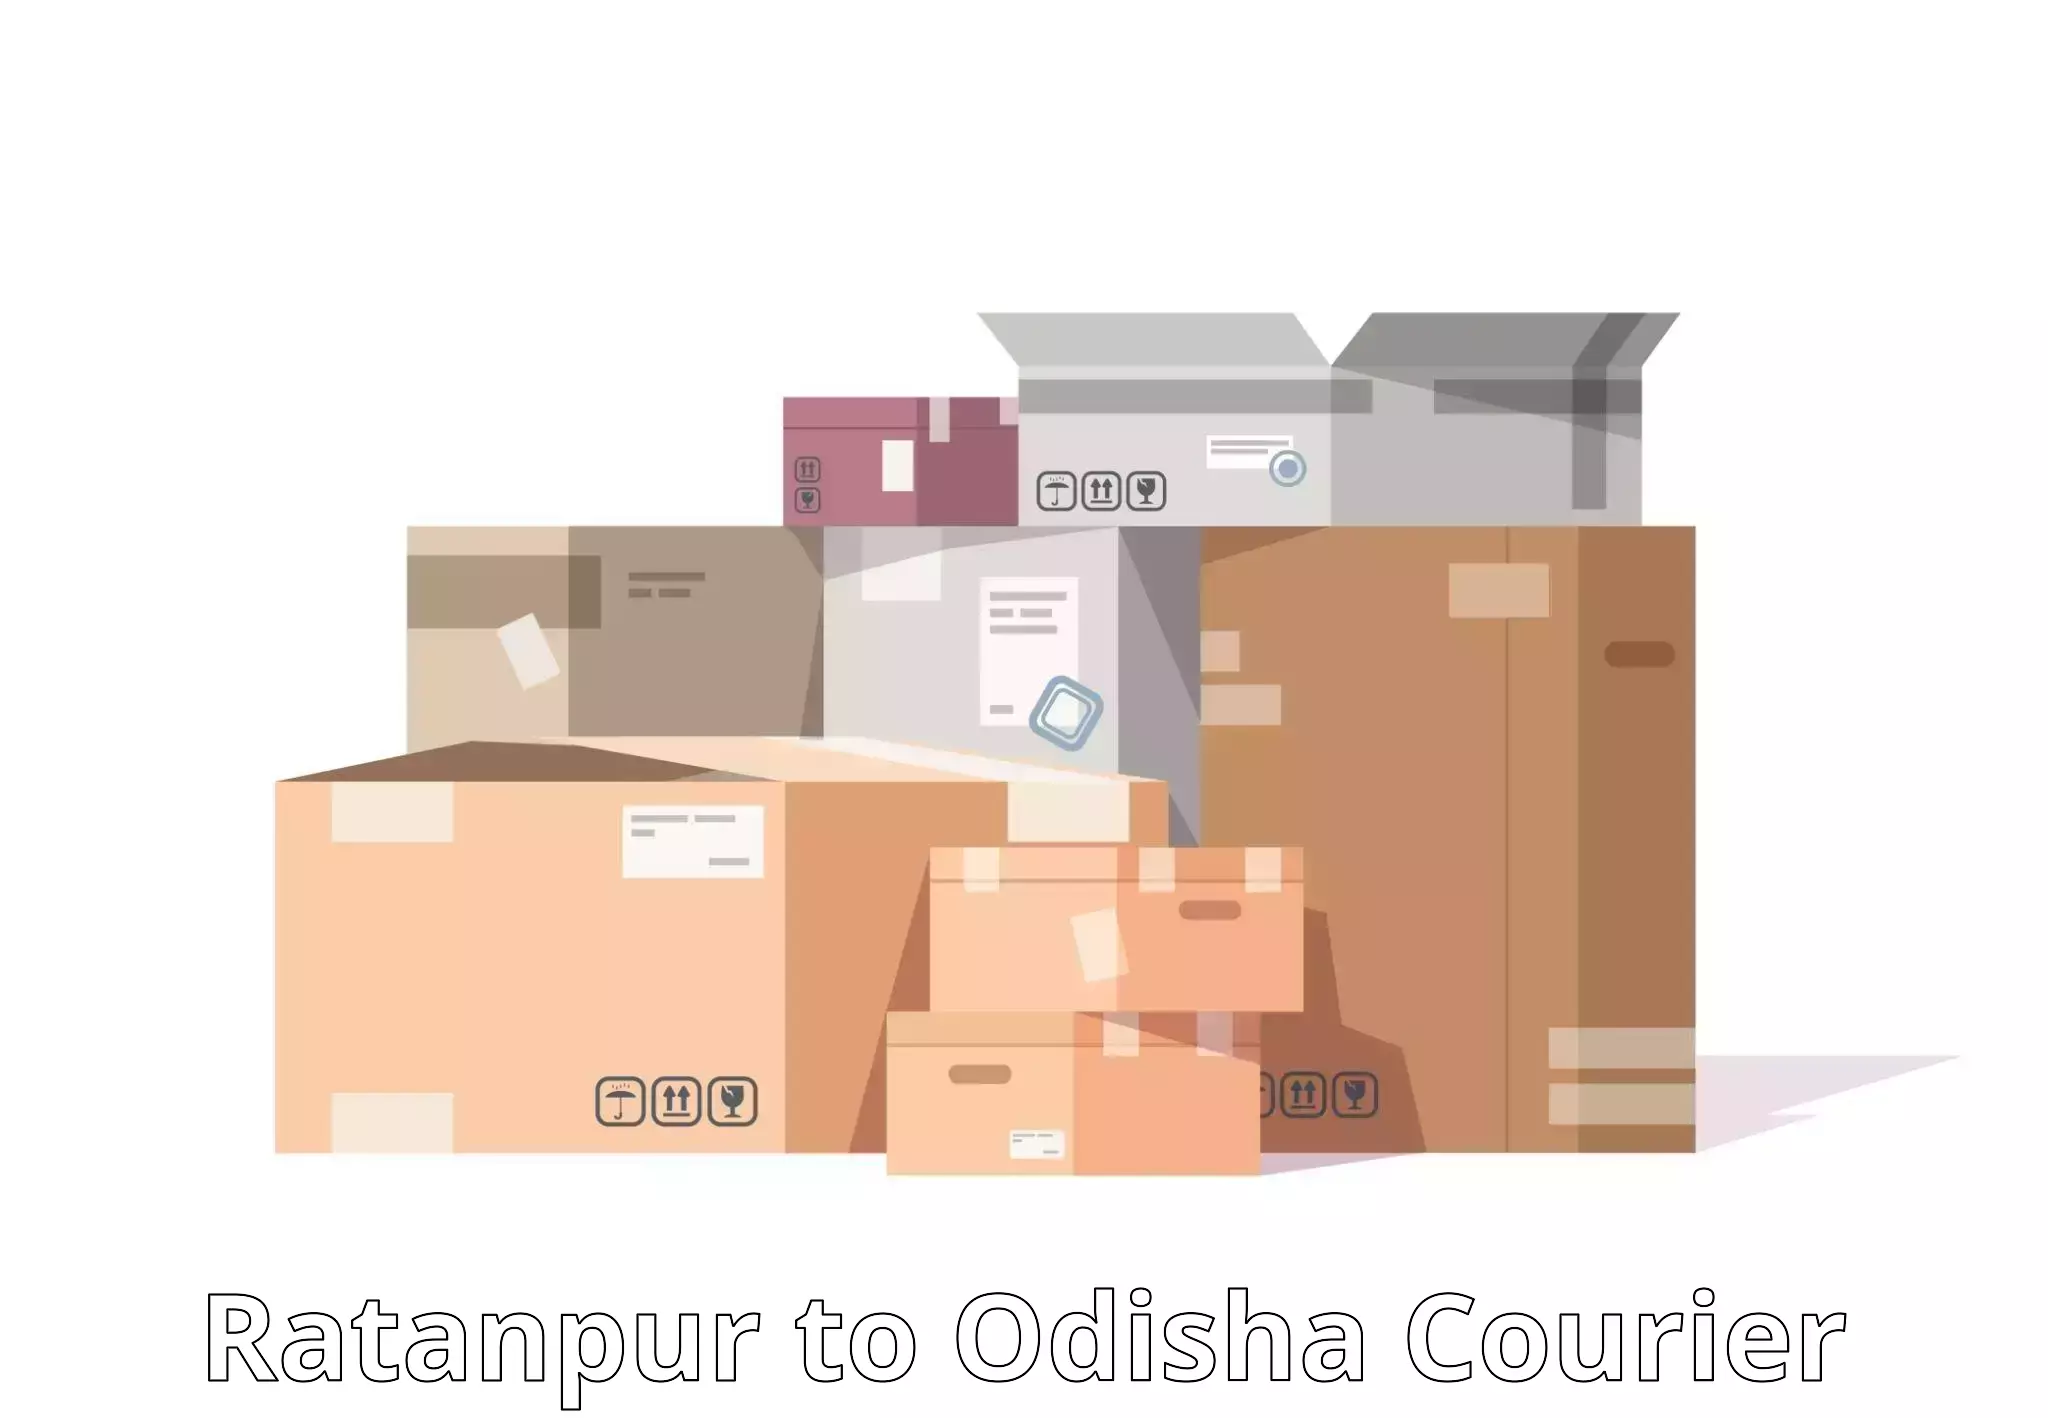 Full-service courier options Ratanpur to Bhuban